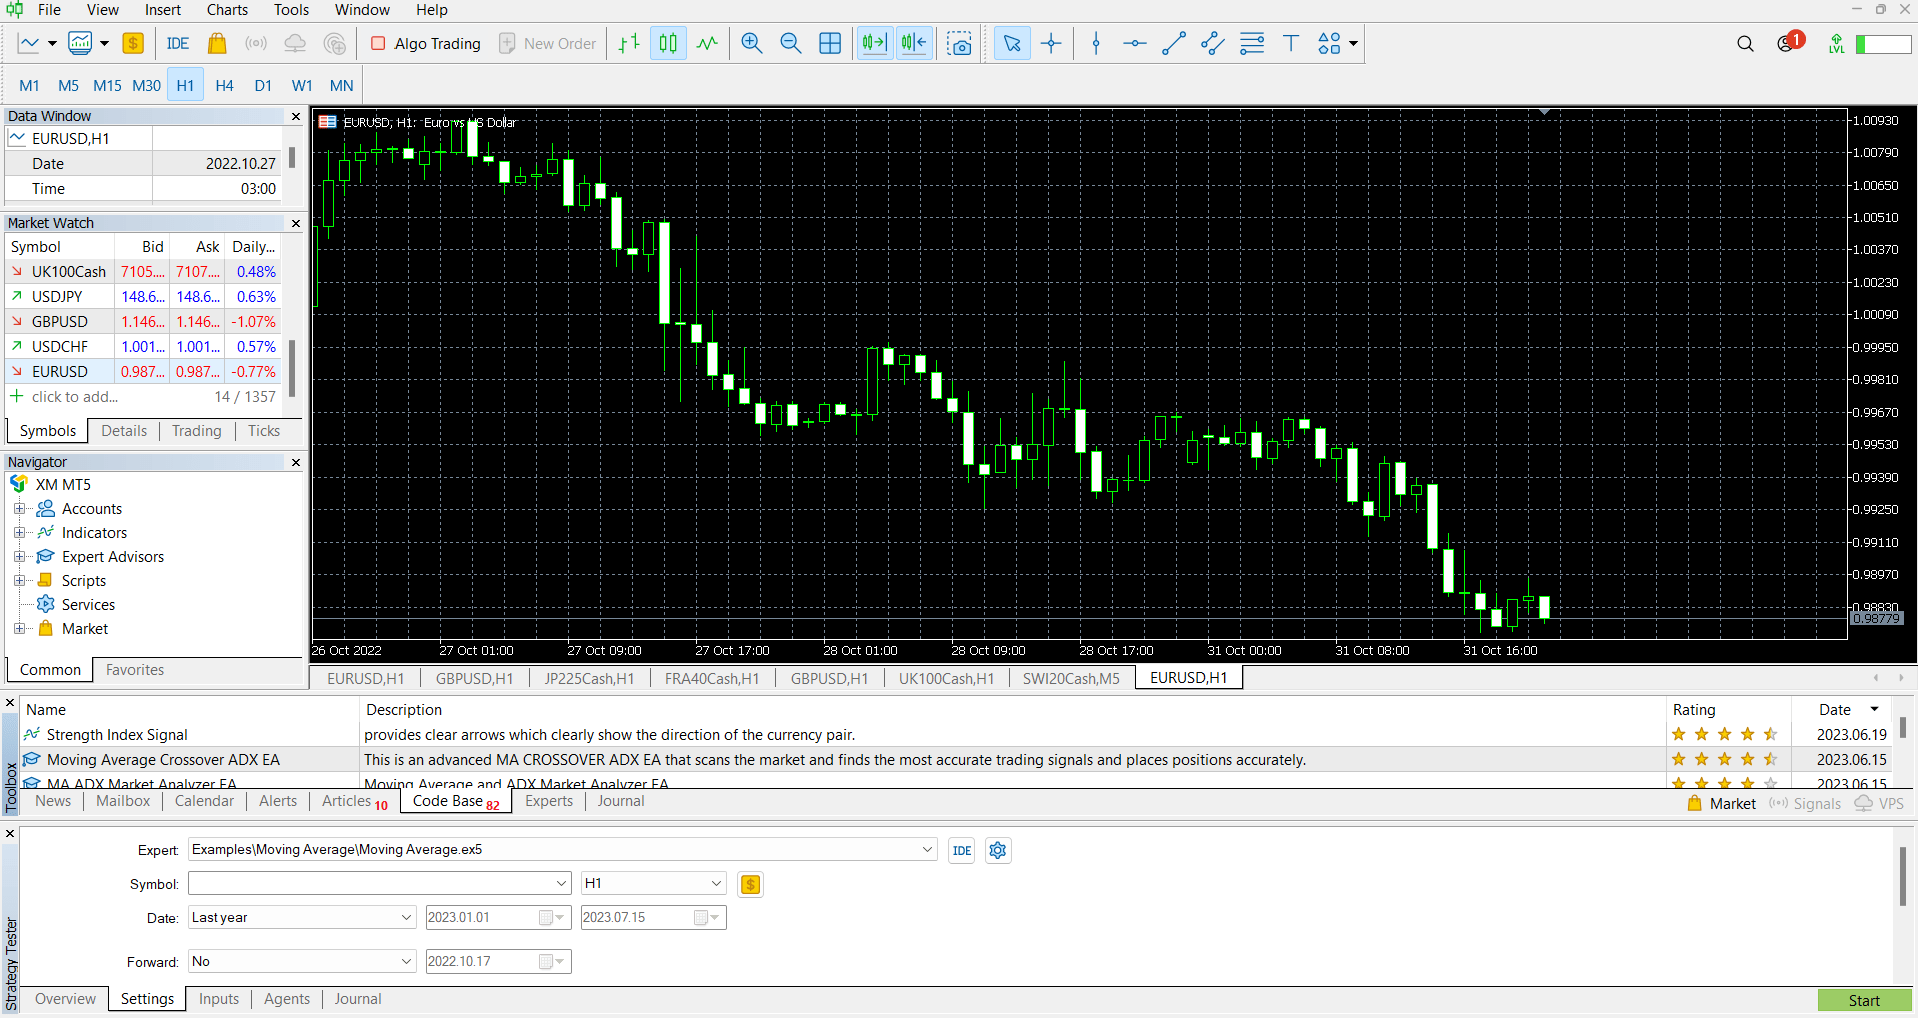 Screenshot of LBLV's MT5 technical charting for forex trading